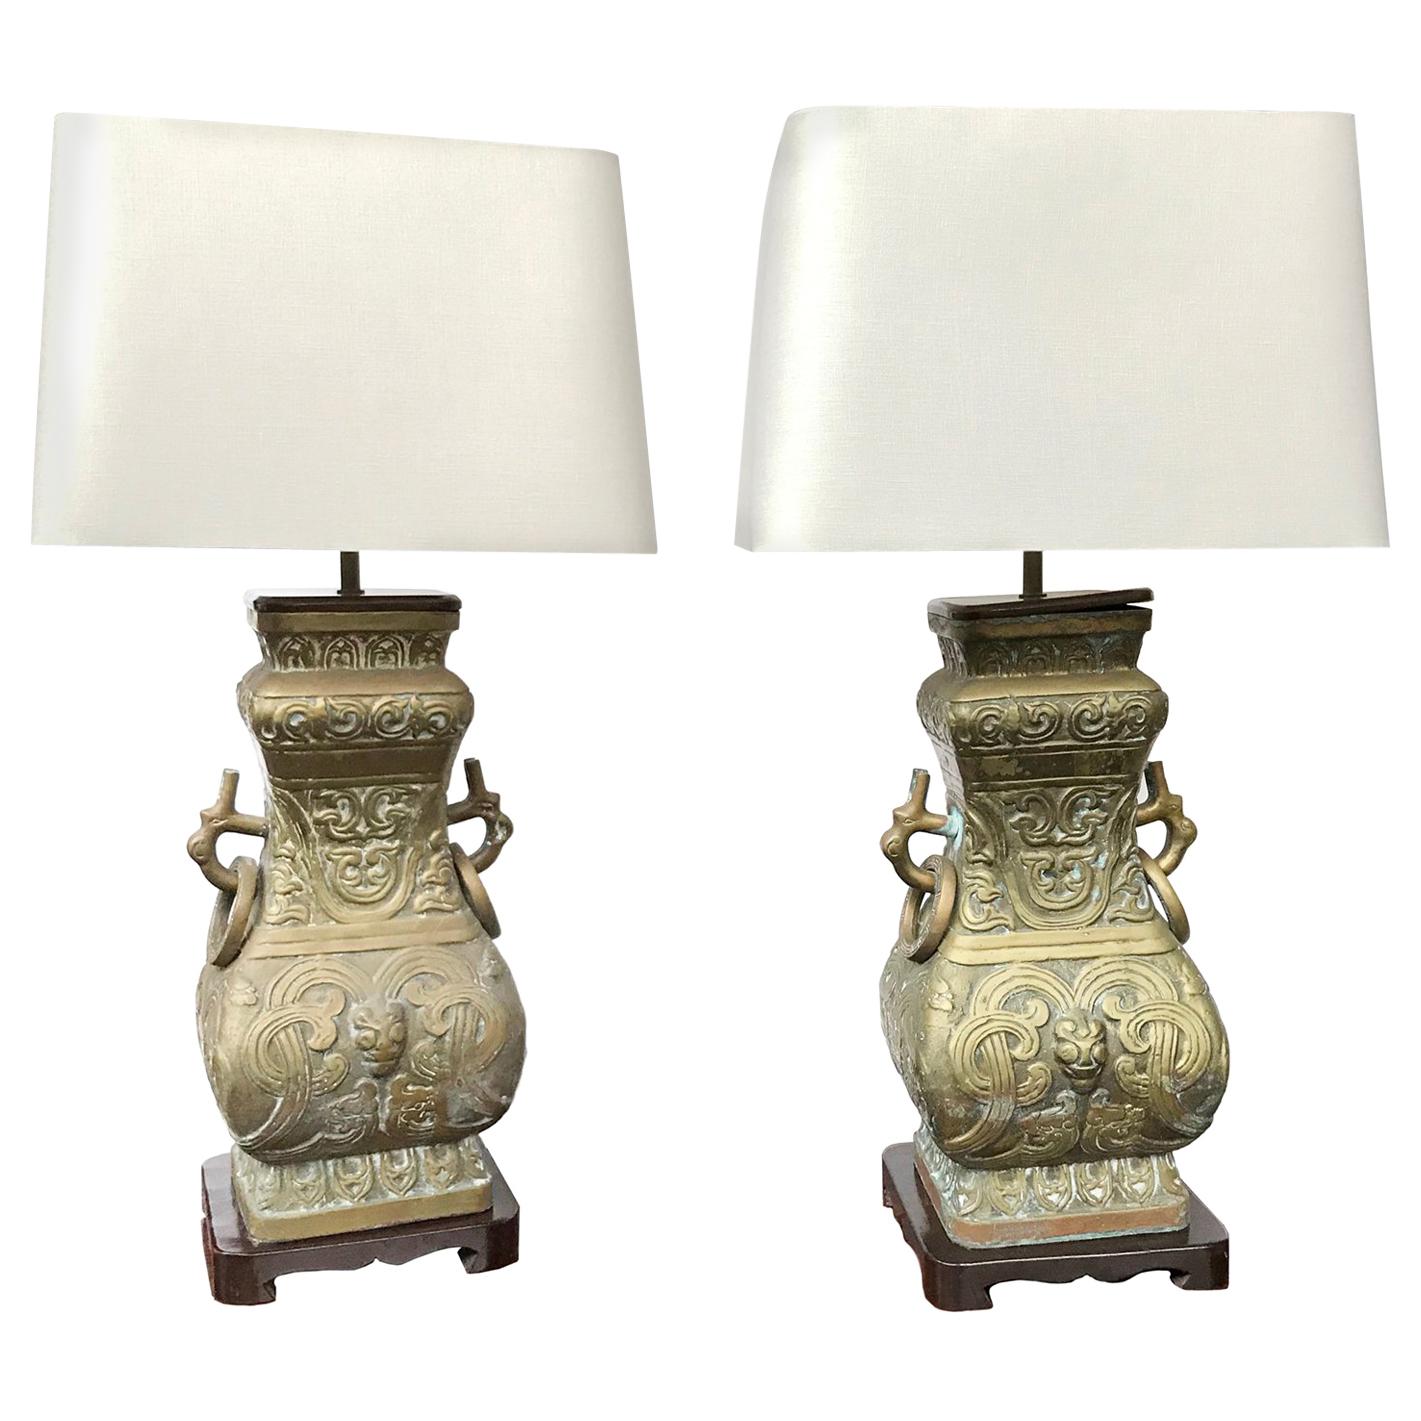 Pair of Mid-20th Century James Mont Style Brass Table Lamps